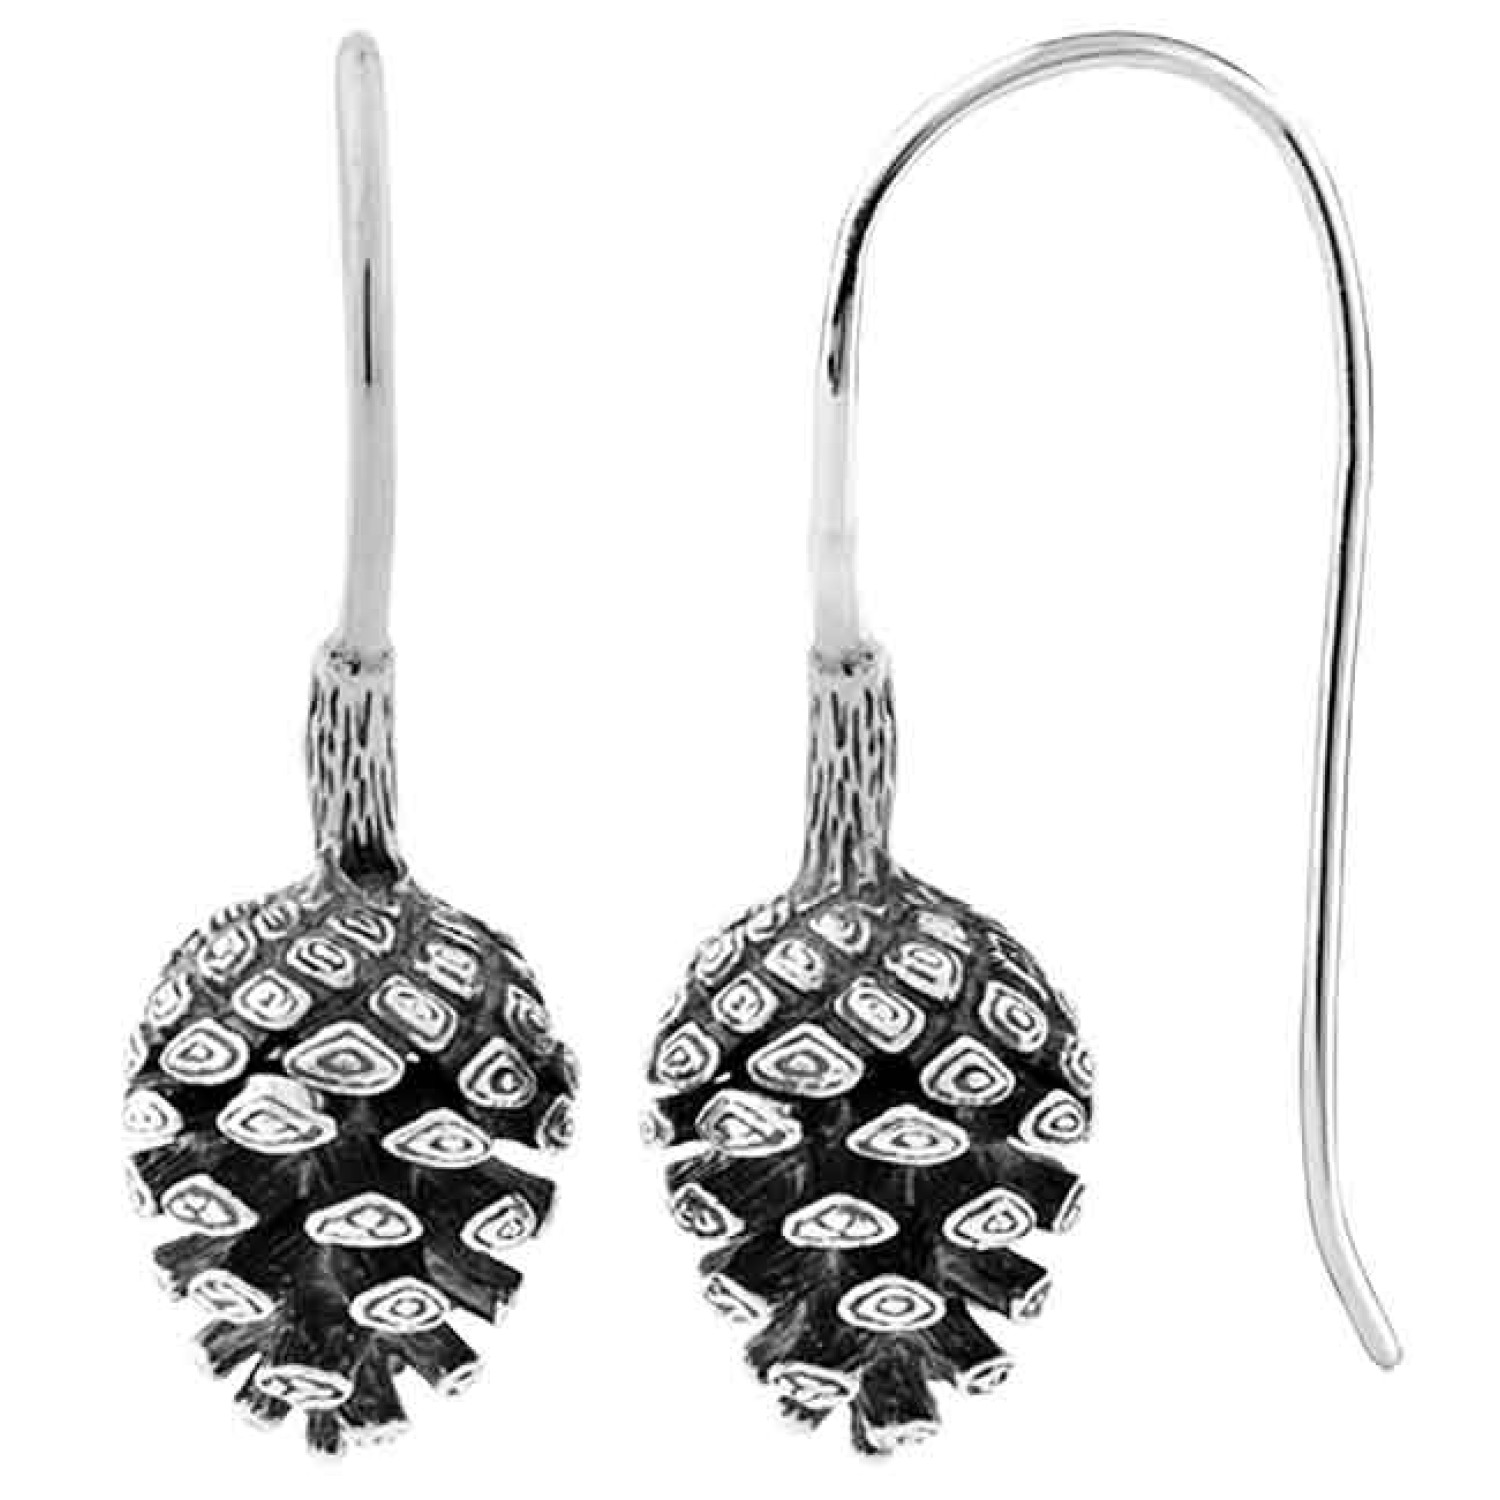 2E61003 Evolve NZ Pinecone Drop Earrings. The iconic, valued little pinecone is a symbol of independence, intuition and recreation. As each perfect little seed floats freely to the ground it finds a special place to grow into a strong pine tree. Available